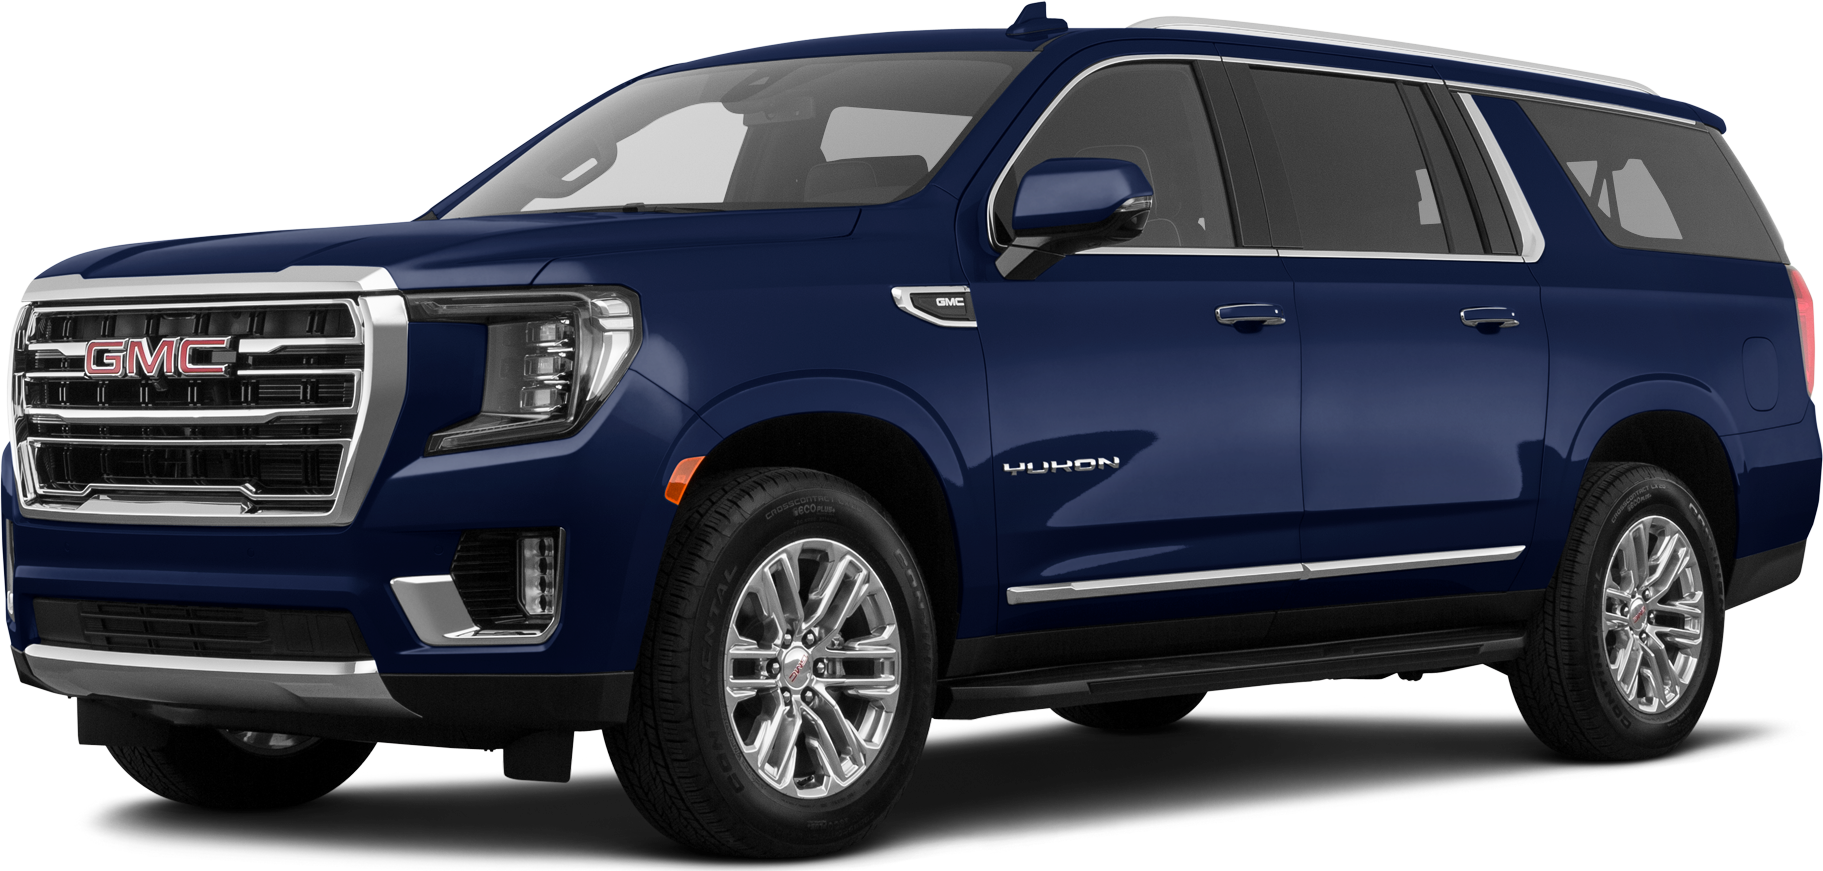 New 2021 Gmc Yukon Xl Reviews Pricing And Specs Kelley Blue Book